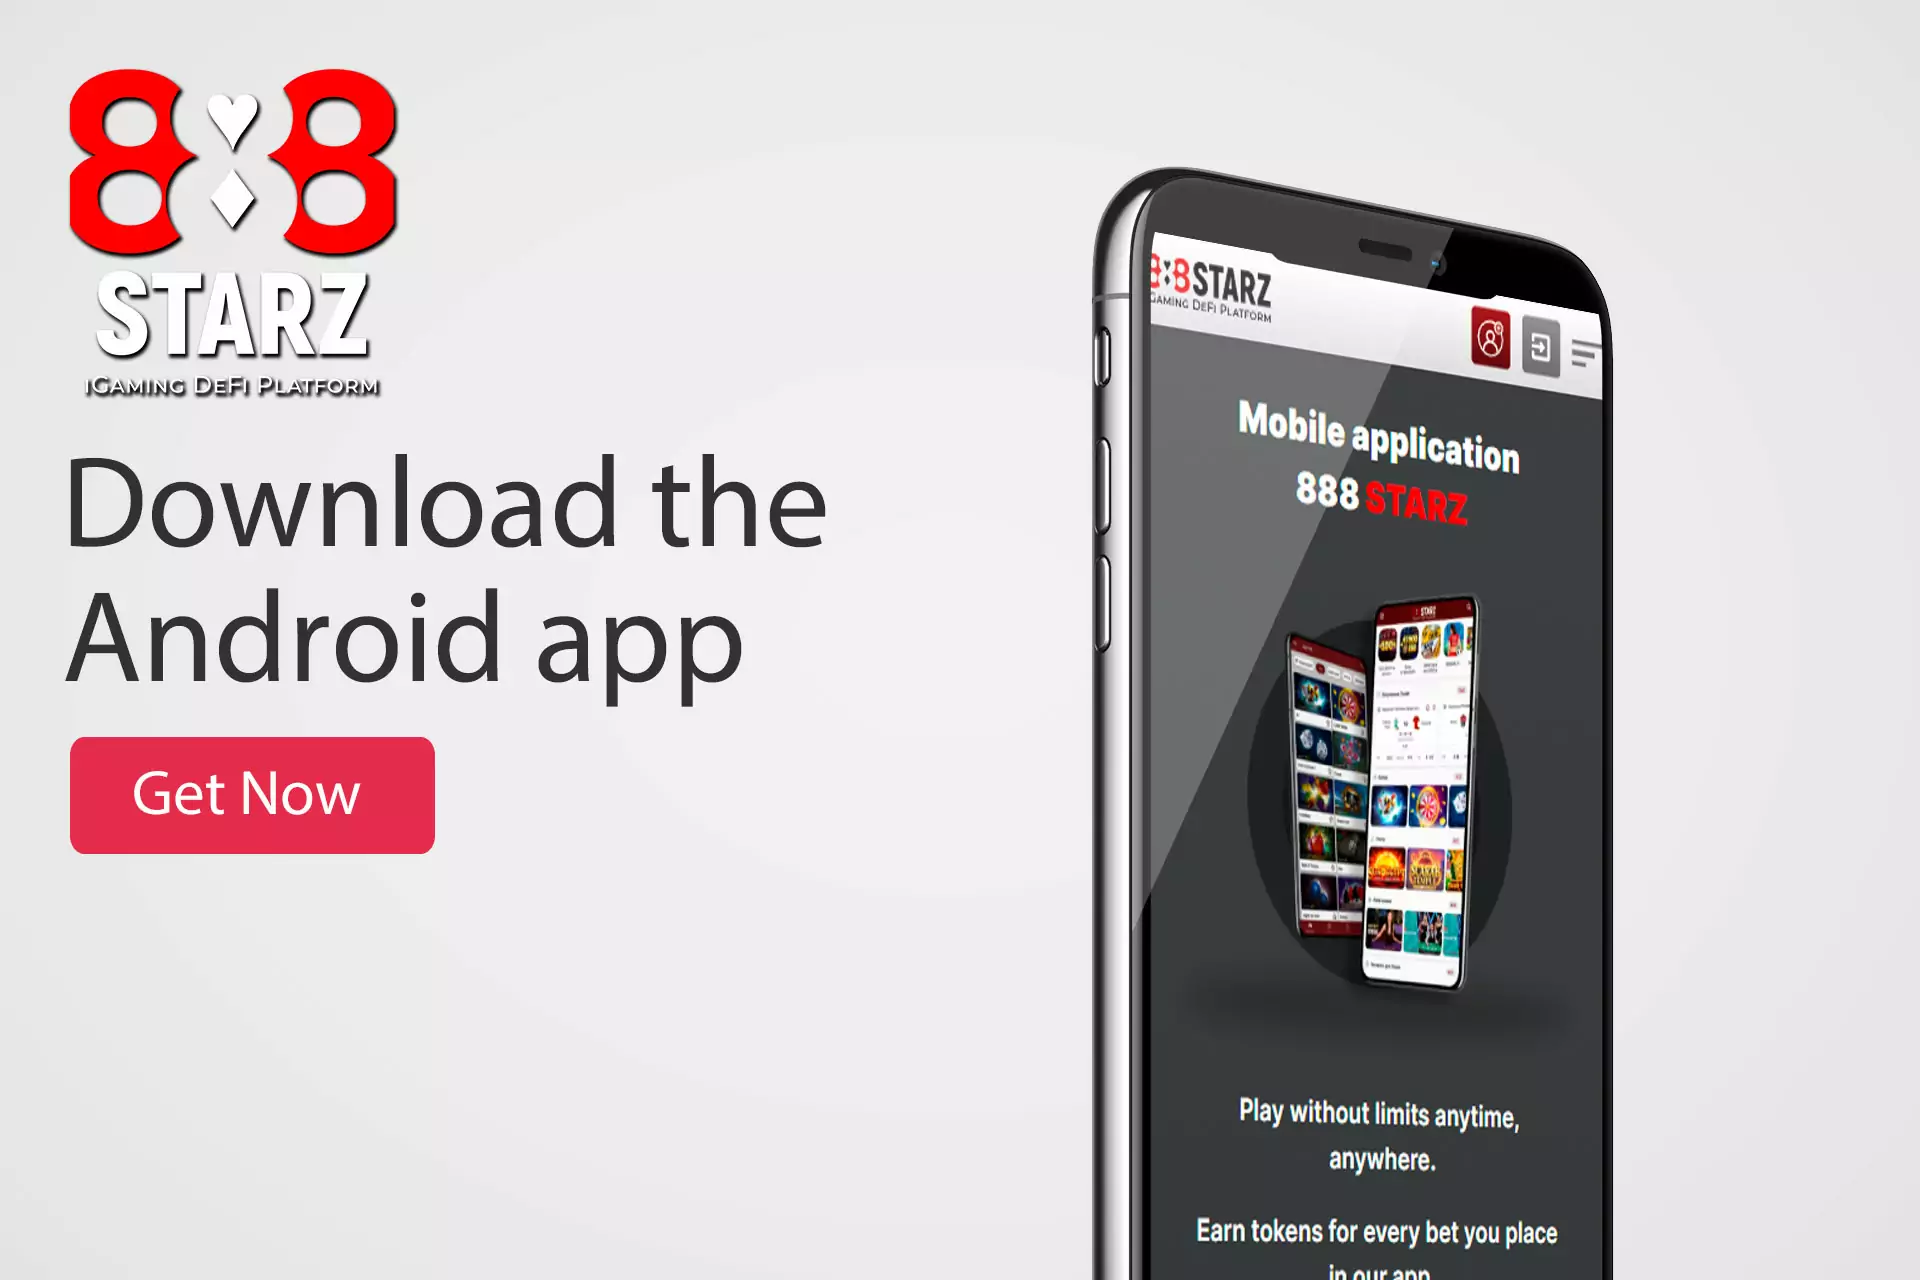 The 888starz app can be downloaded for free for Android.